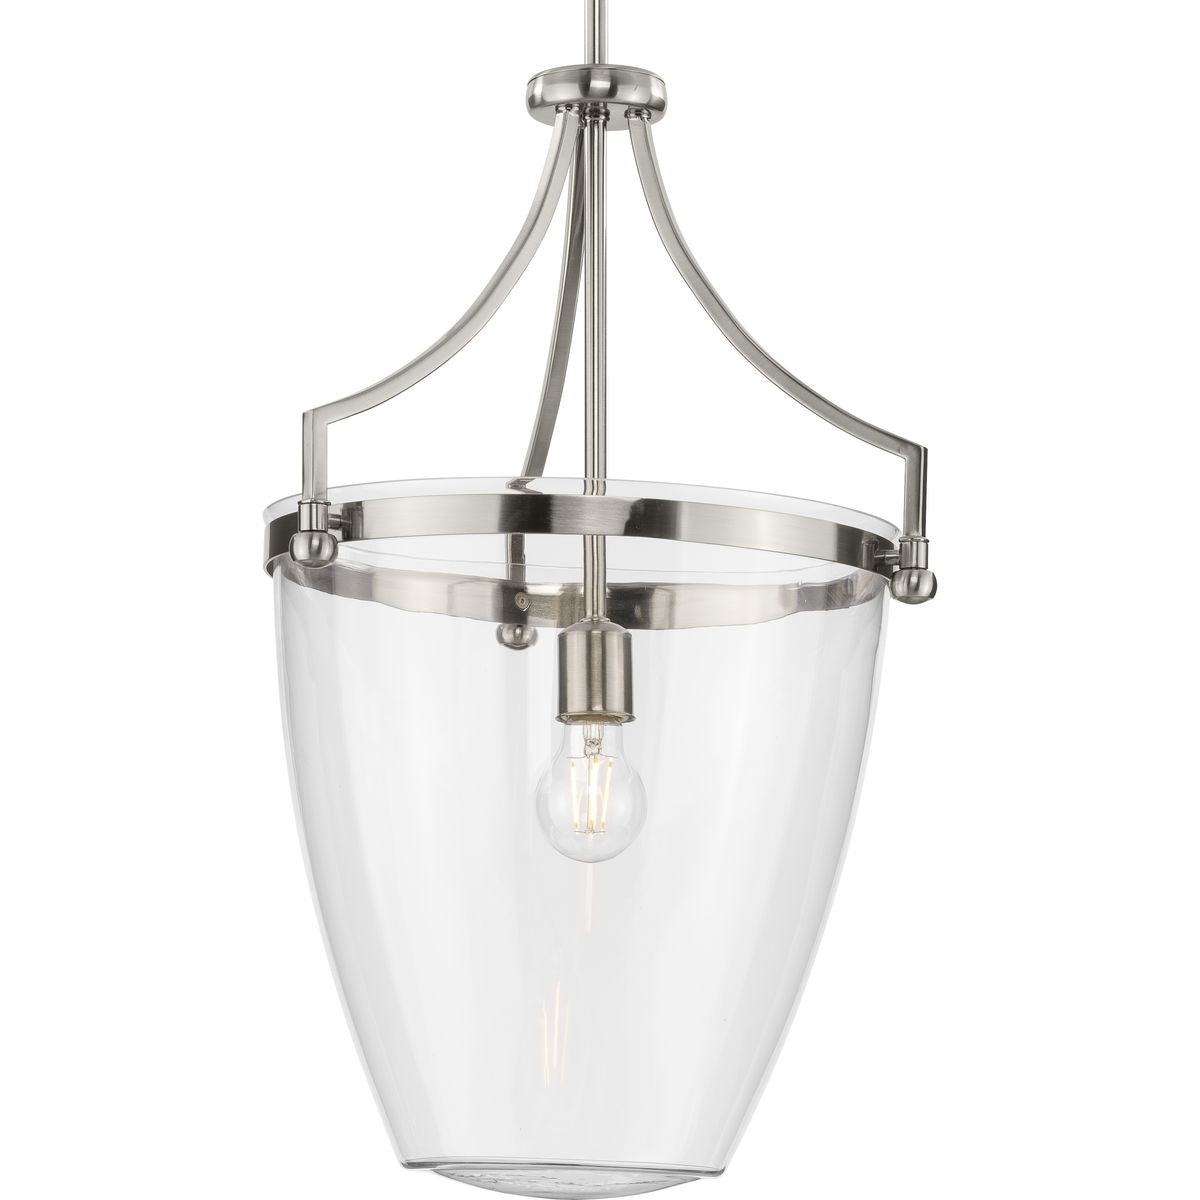 PROGRESS LIGHTING P500361-009 Brushed Nickel Parkhurst Collection One-Light New Traditional Brushed Nickel Clear Glass Pendant Light